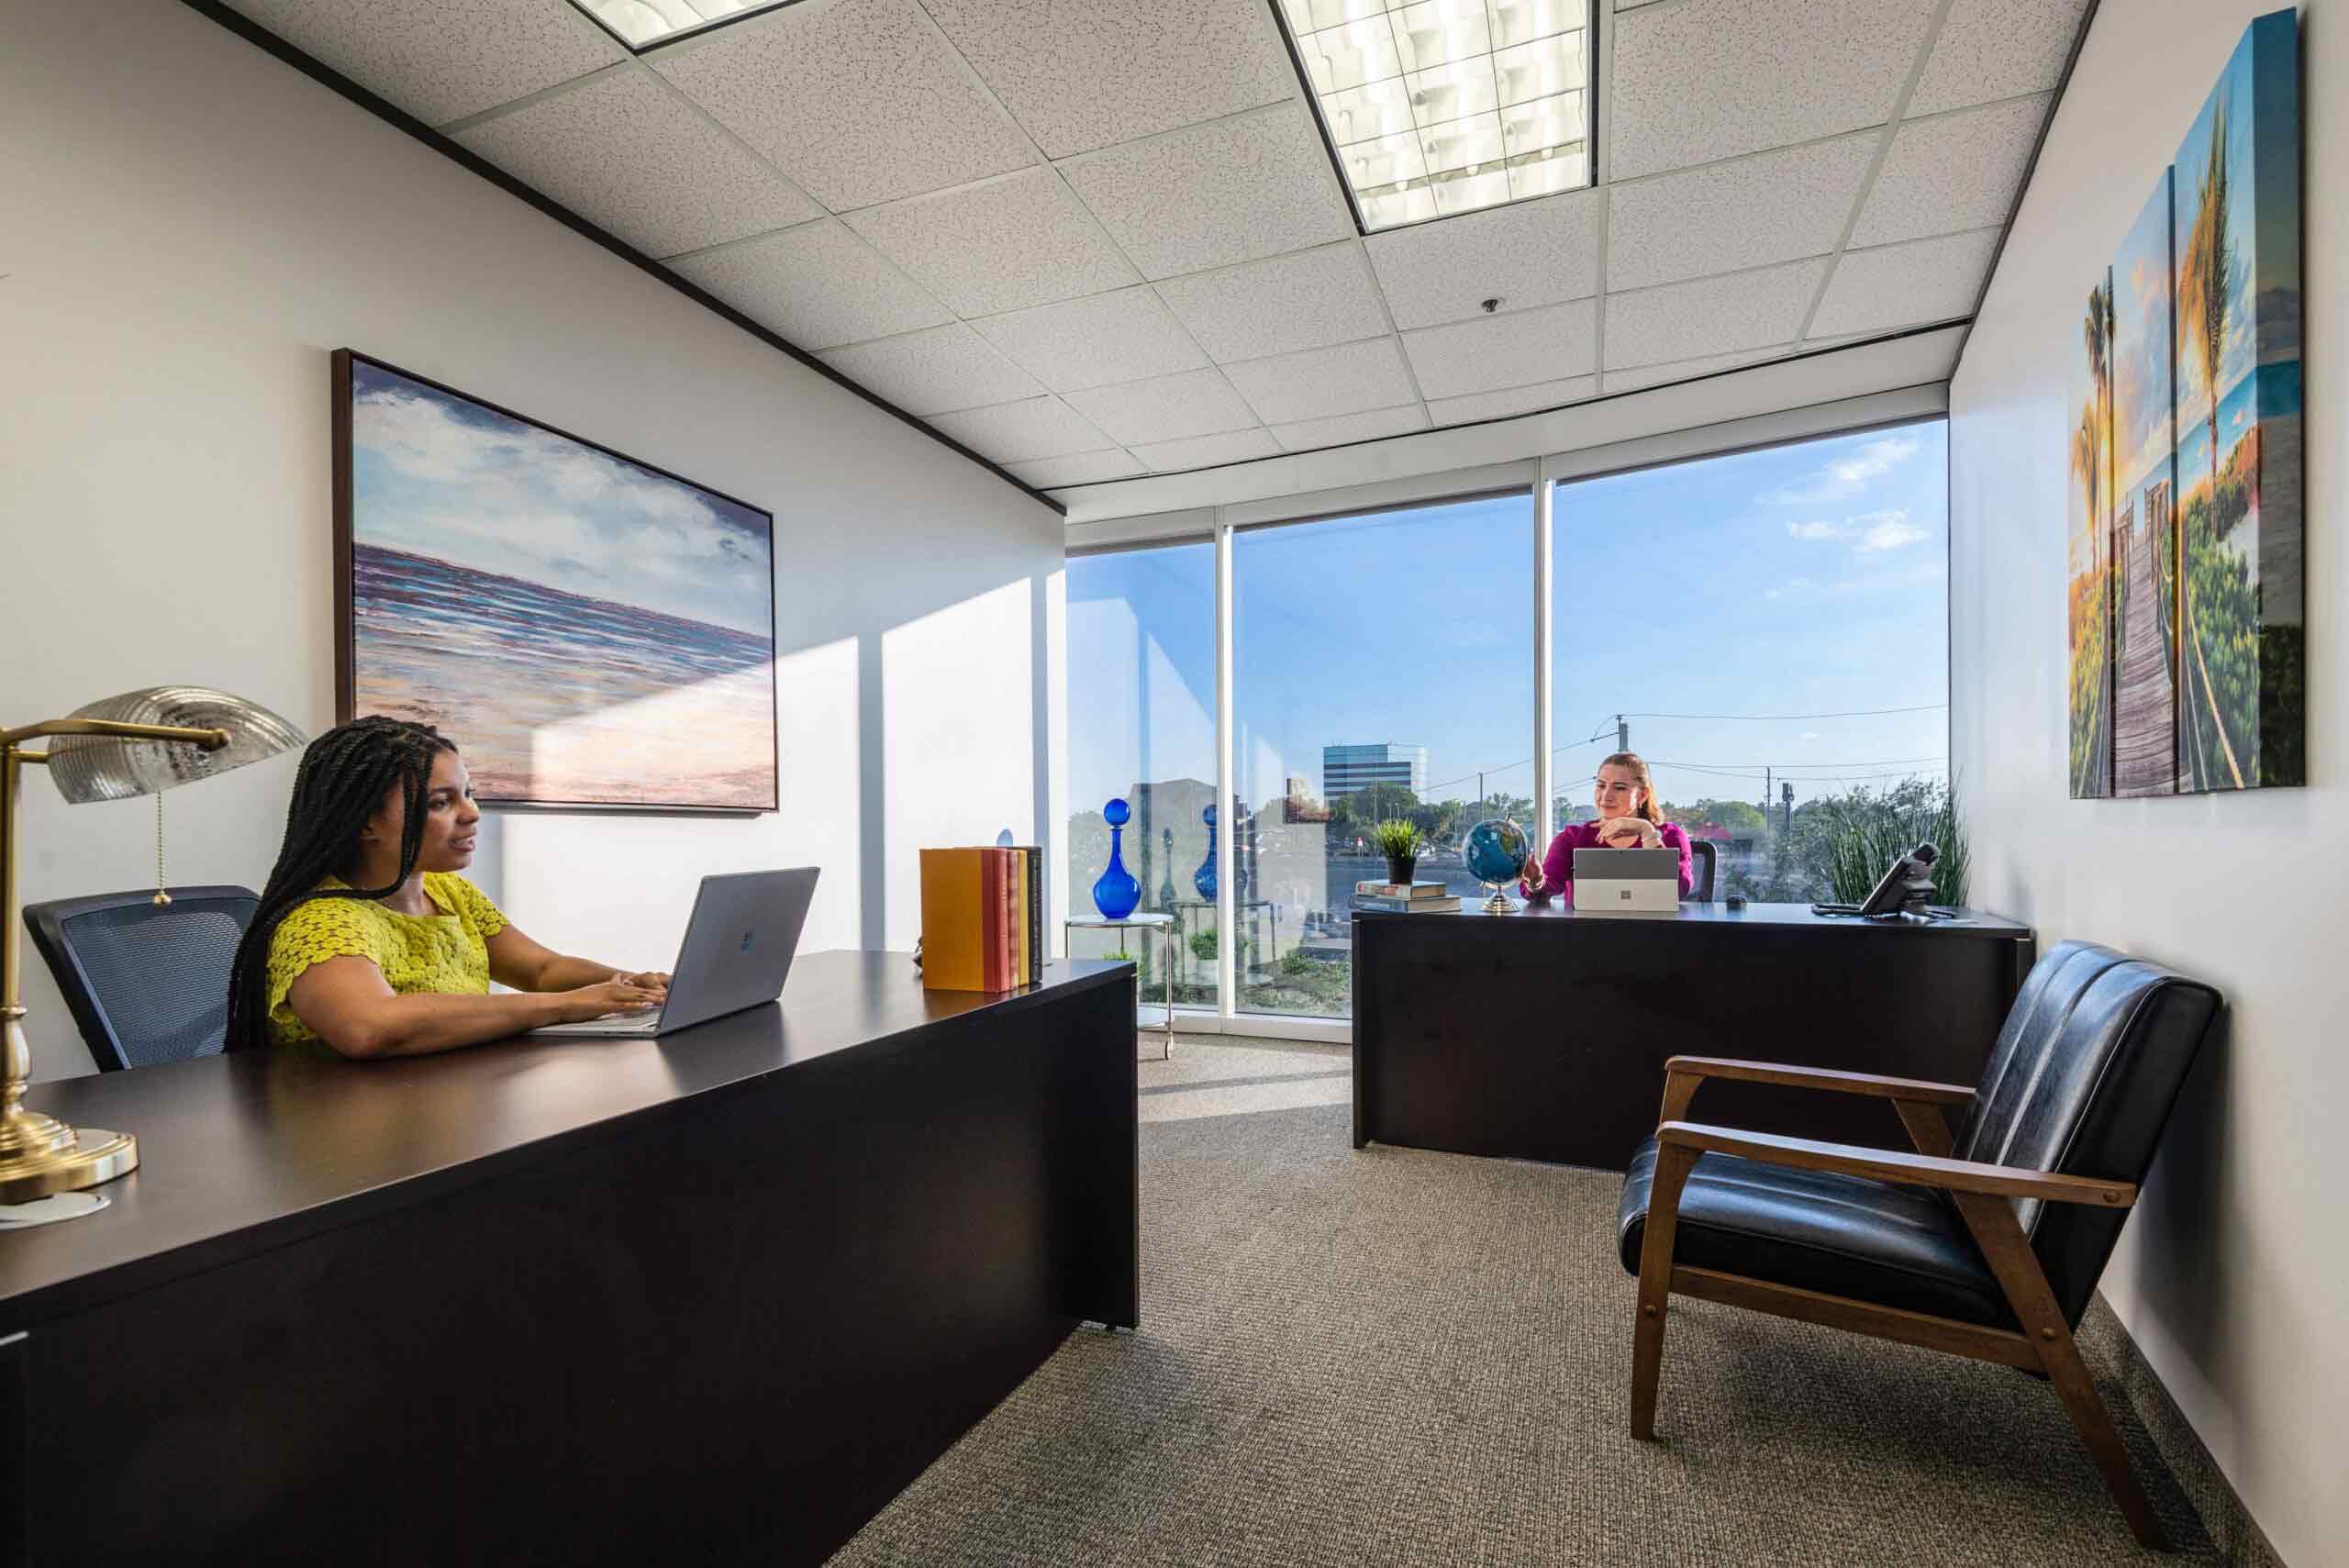 Large shared office space in North Dallas with floor to ceiling windows and natural light.